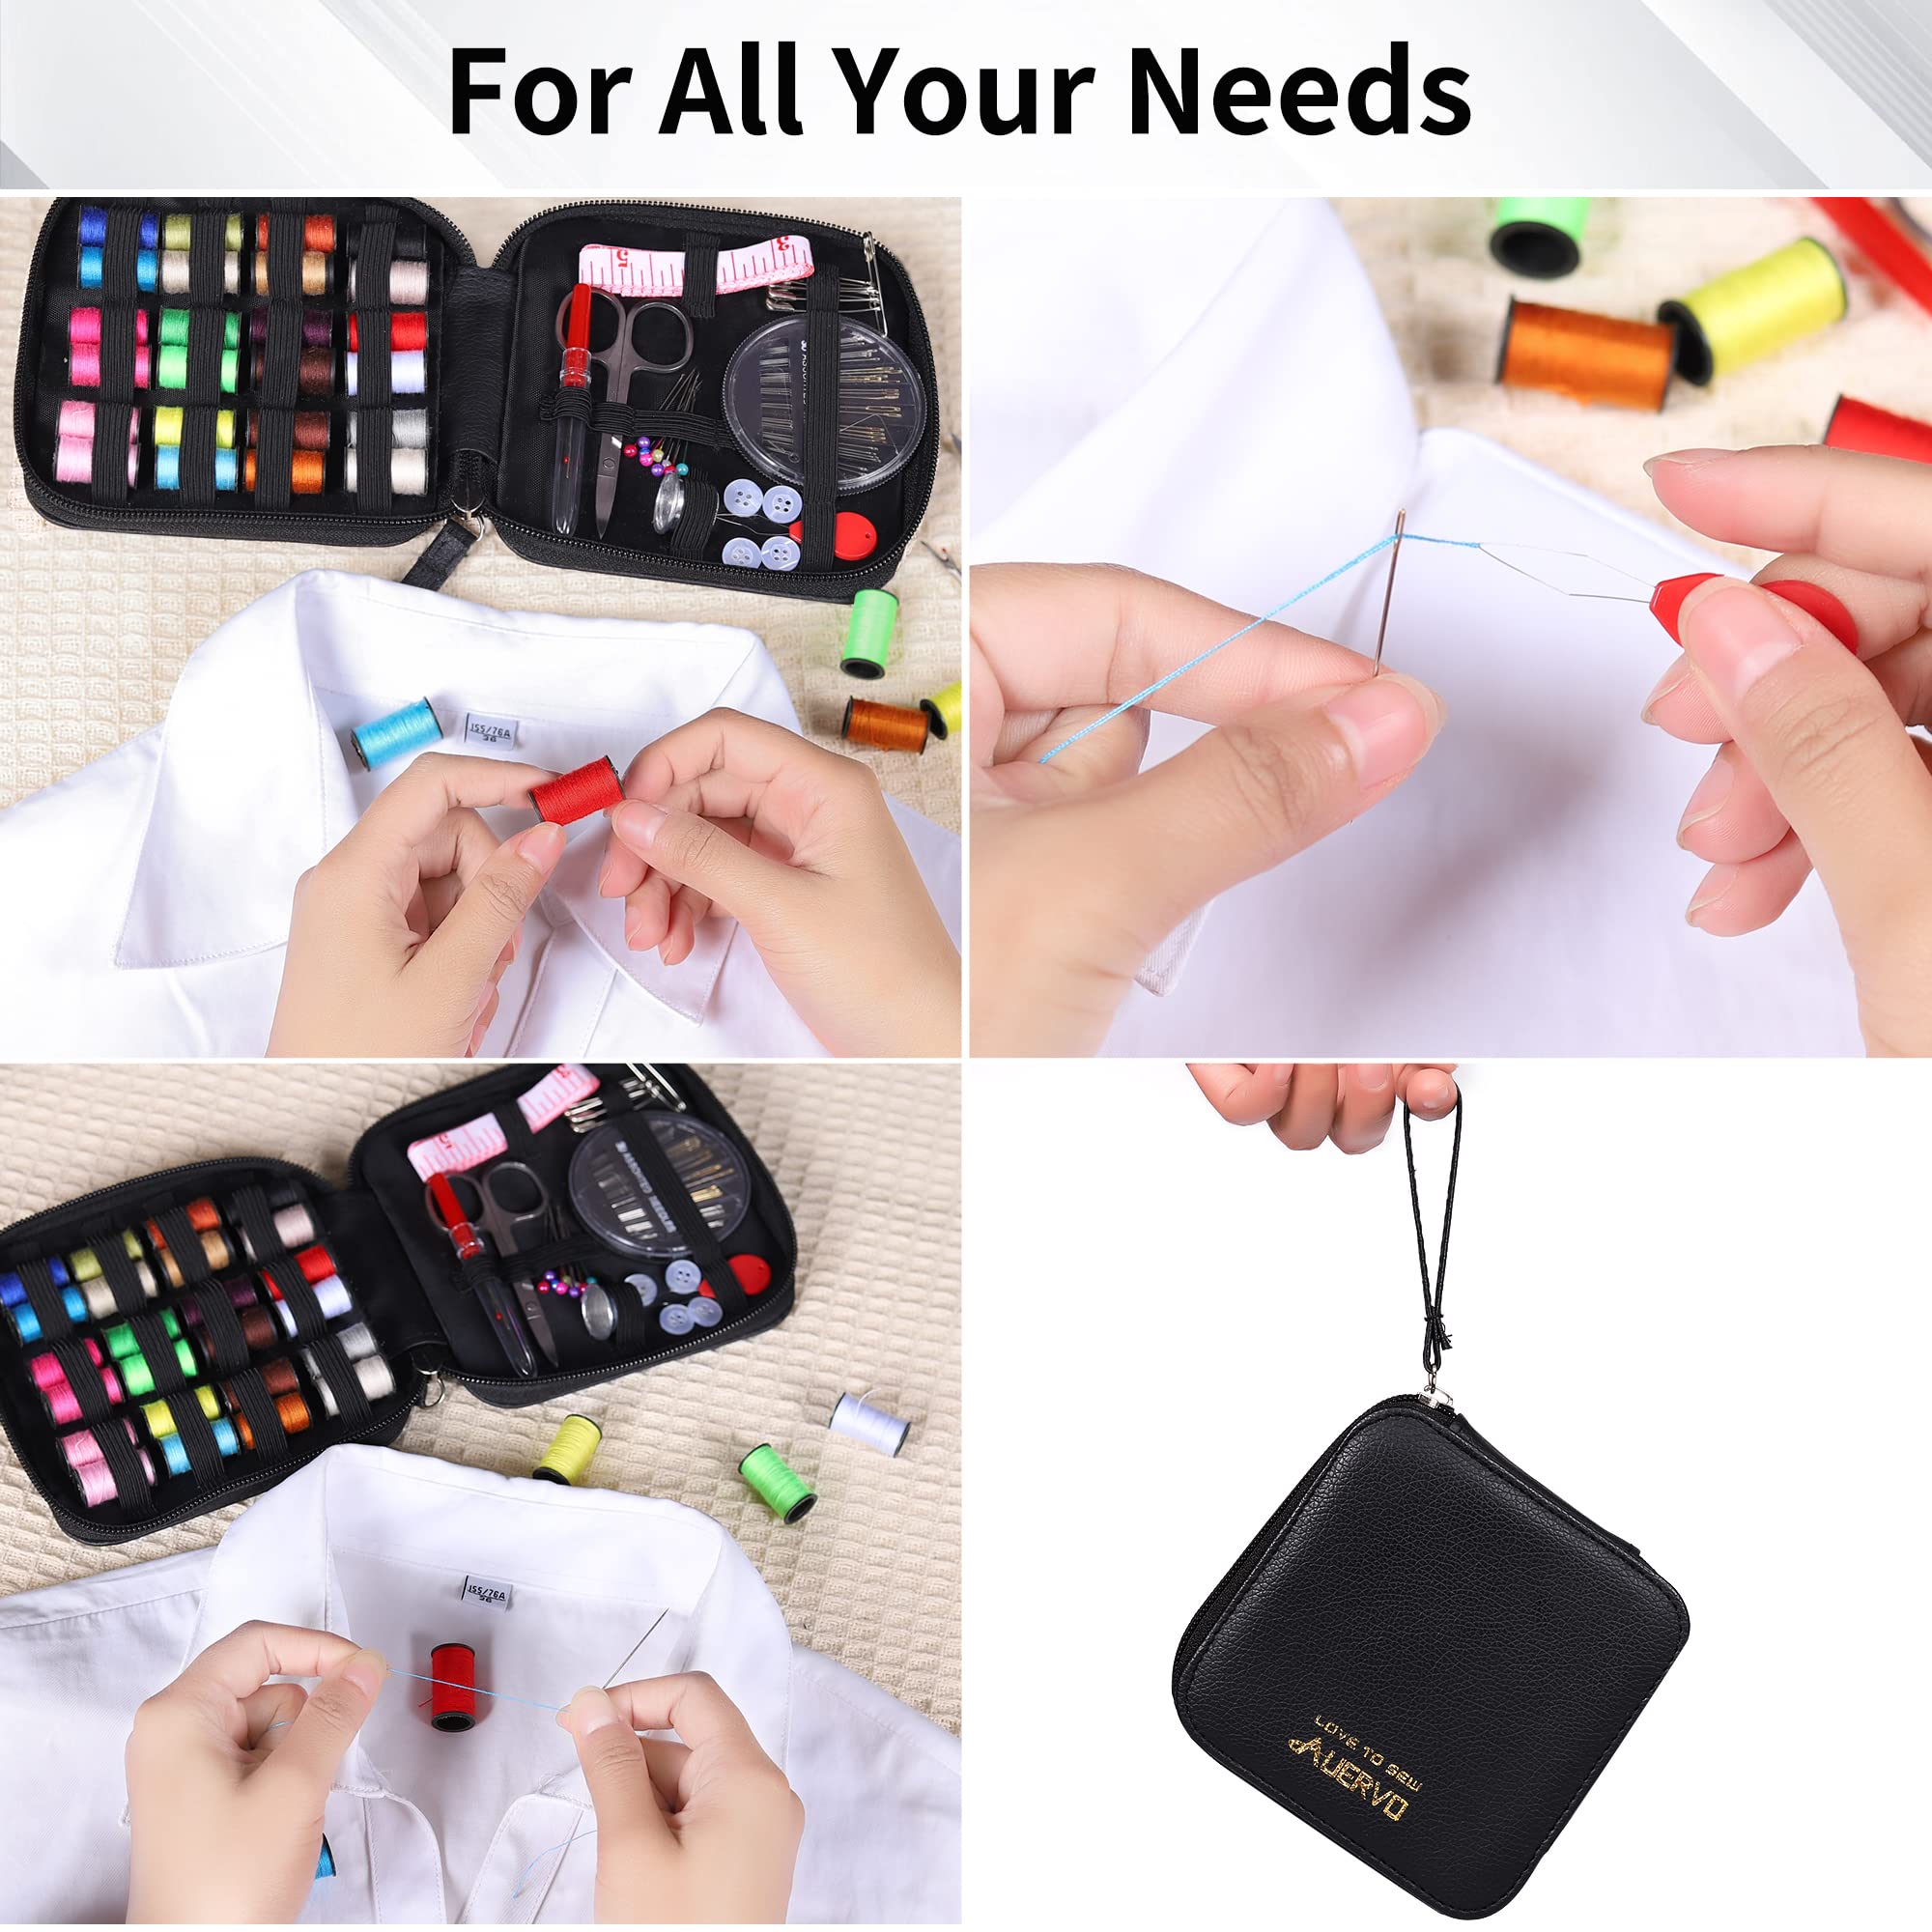 Sewing Kit, AUERVO Mini Basic Sewing Kits with Leather Case Thread and Needles Set for Adults, DIY,Home, Travel & Emergency with Zipper Compact Small Waterproof Durable Black